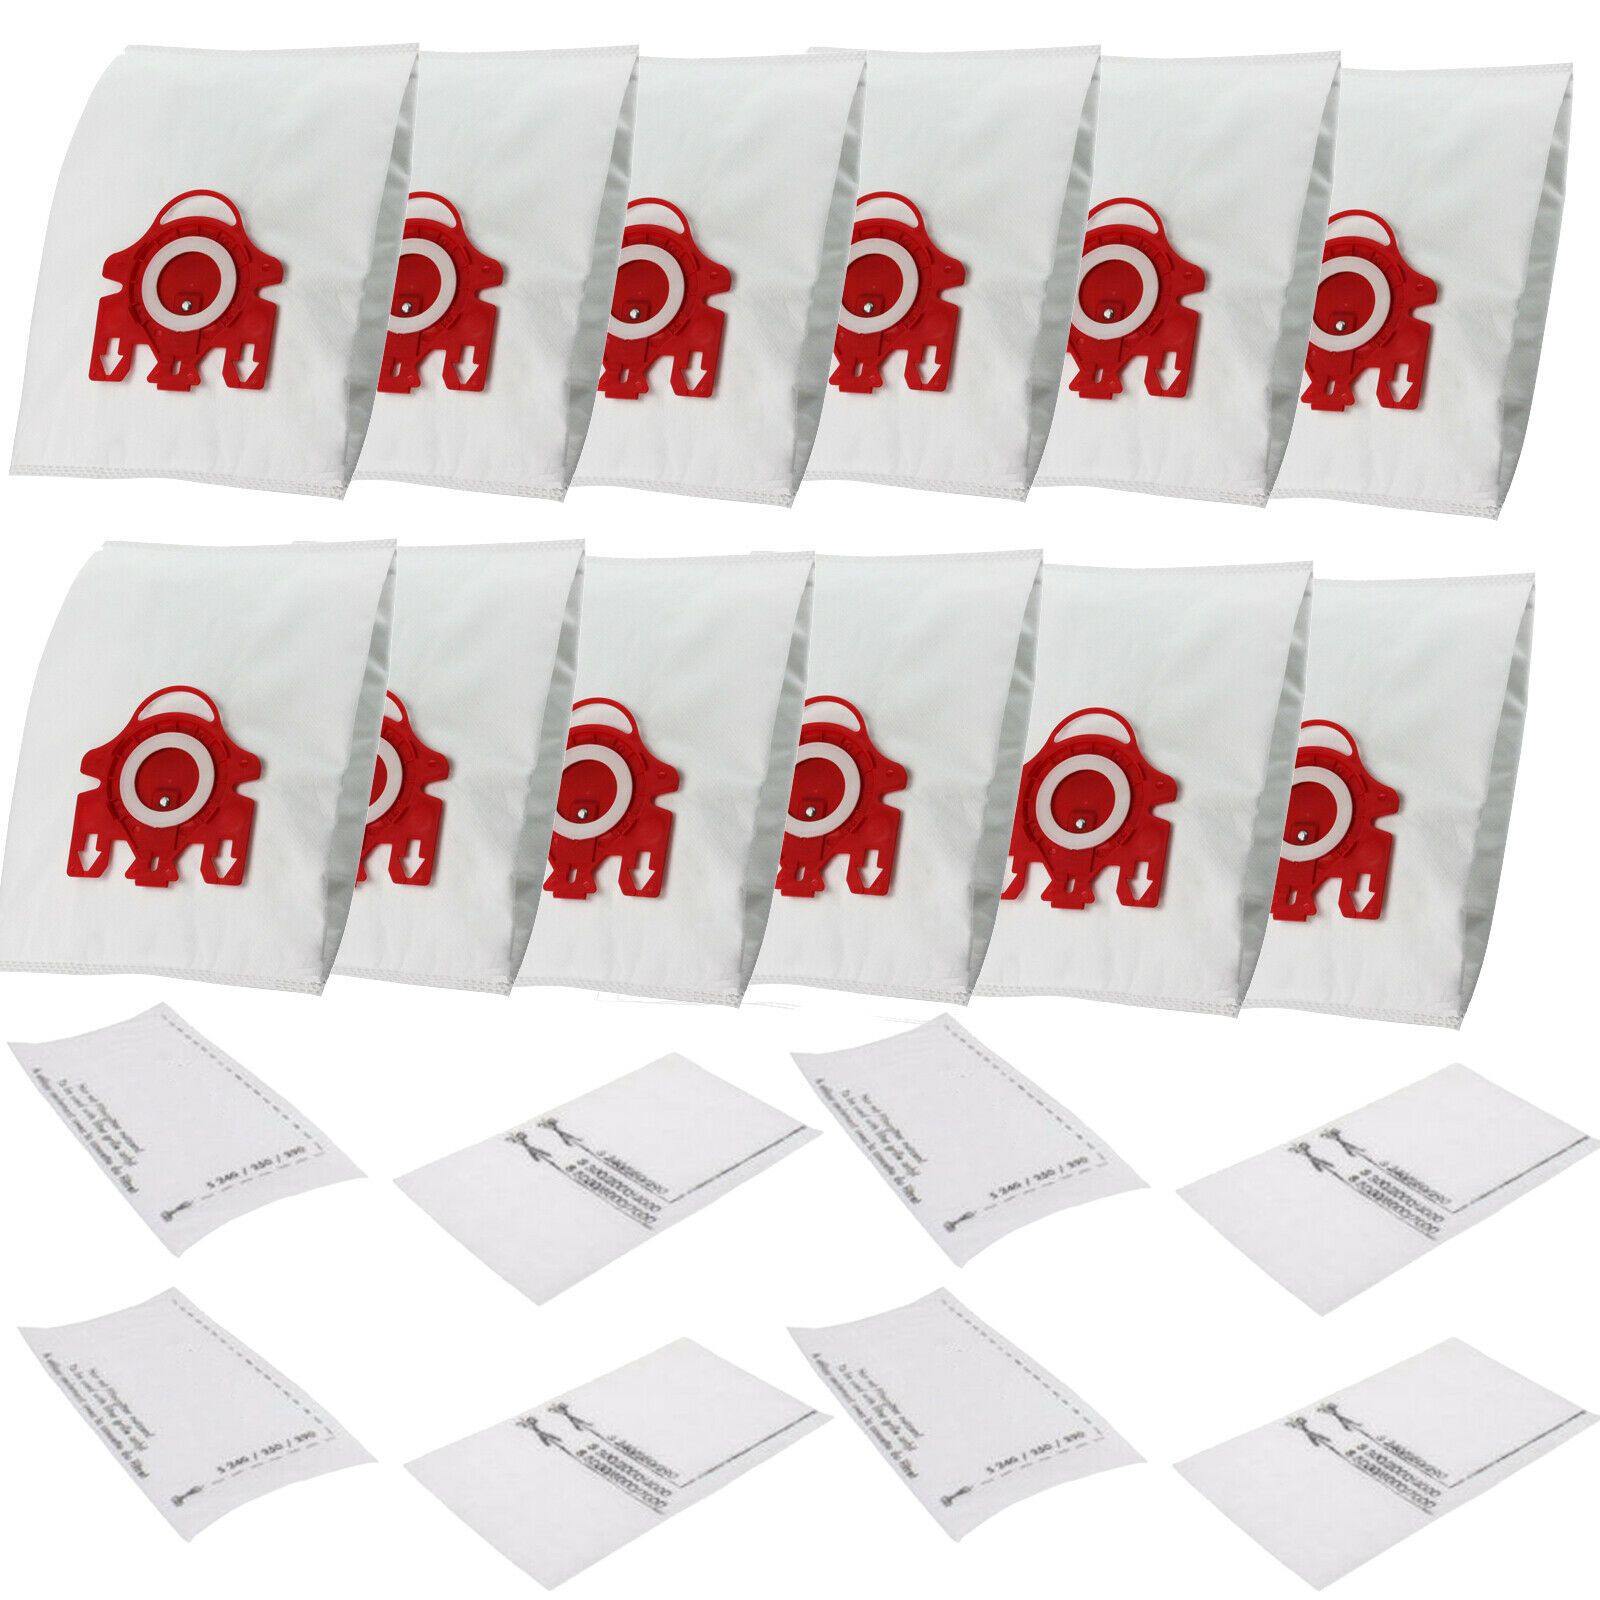 12 Synthetic Dust Bags & 8 Filters For Miele S511 S512 S512I S513 S514-1 S515-1 Sparesbarn